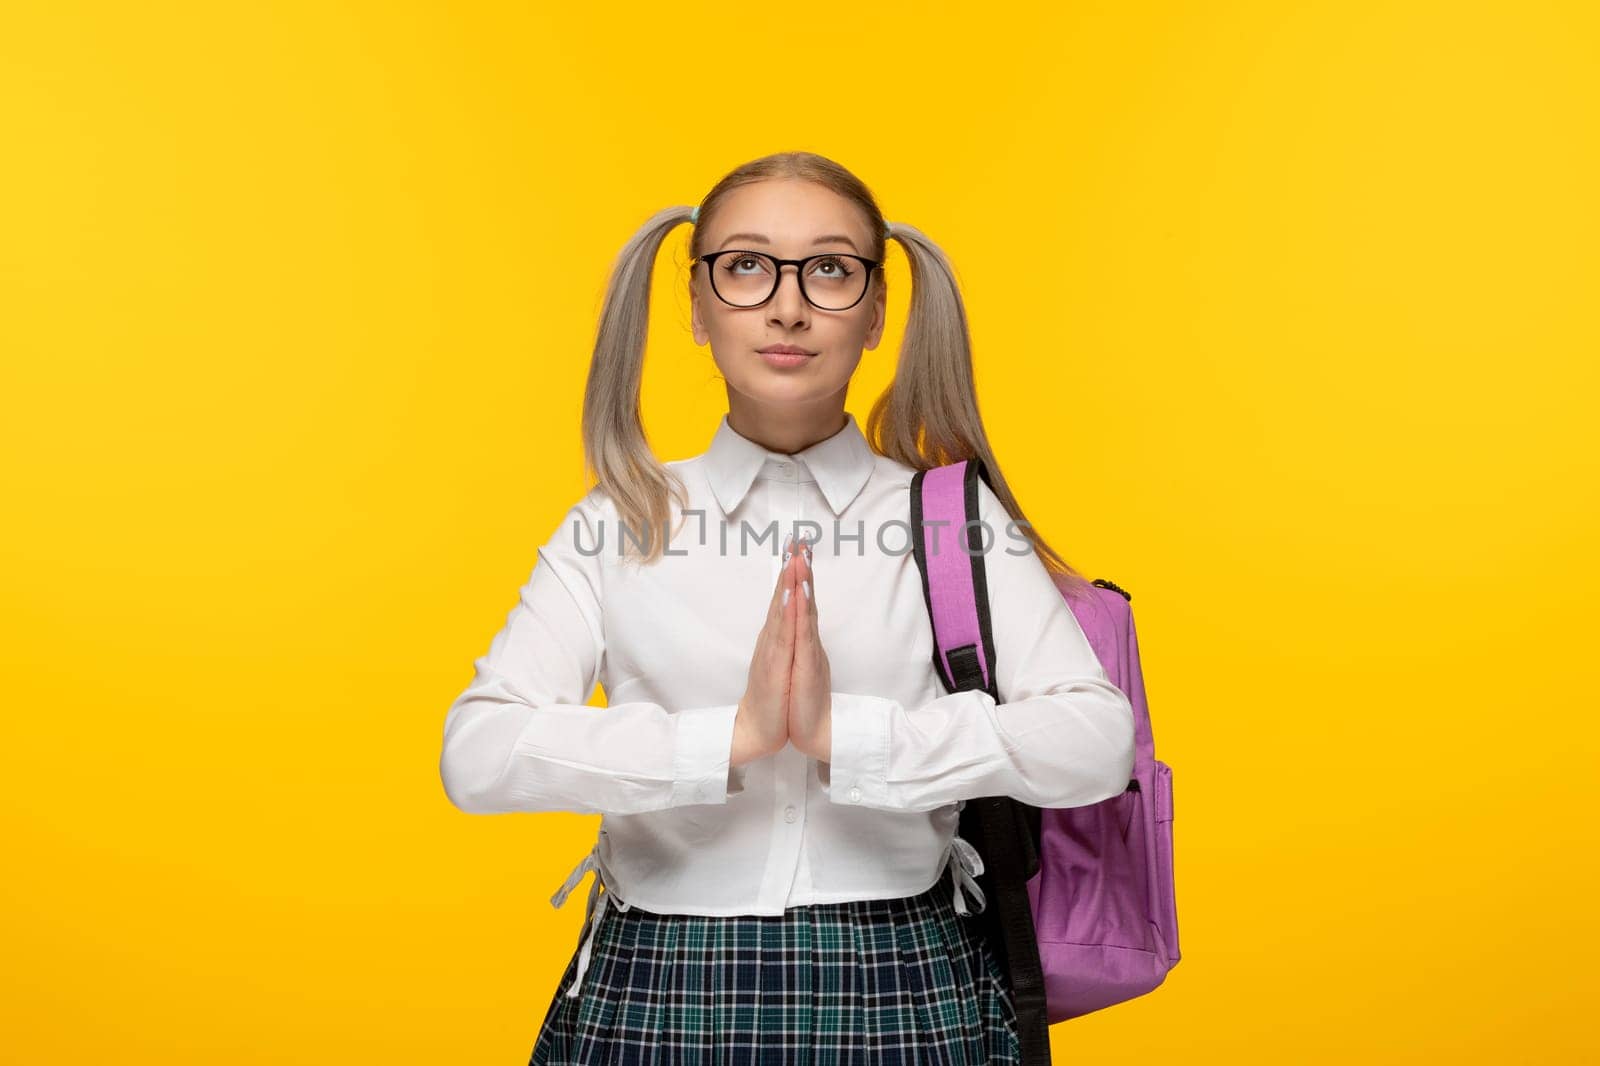 world book day blonde young girl praying hands together on yellow background by Kamran